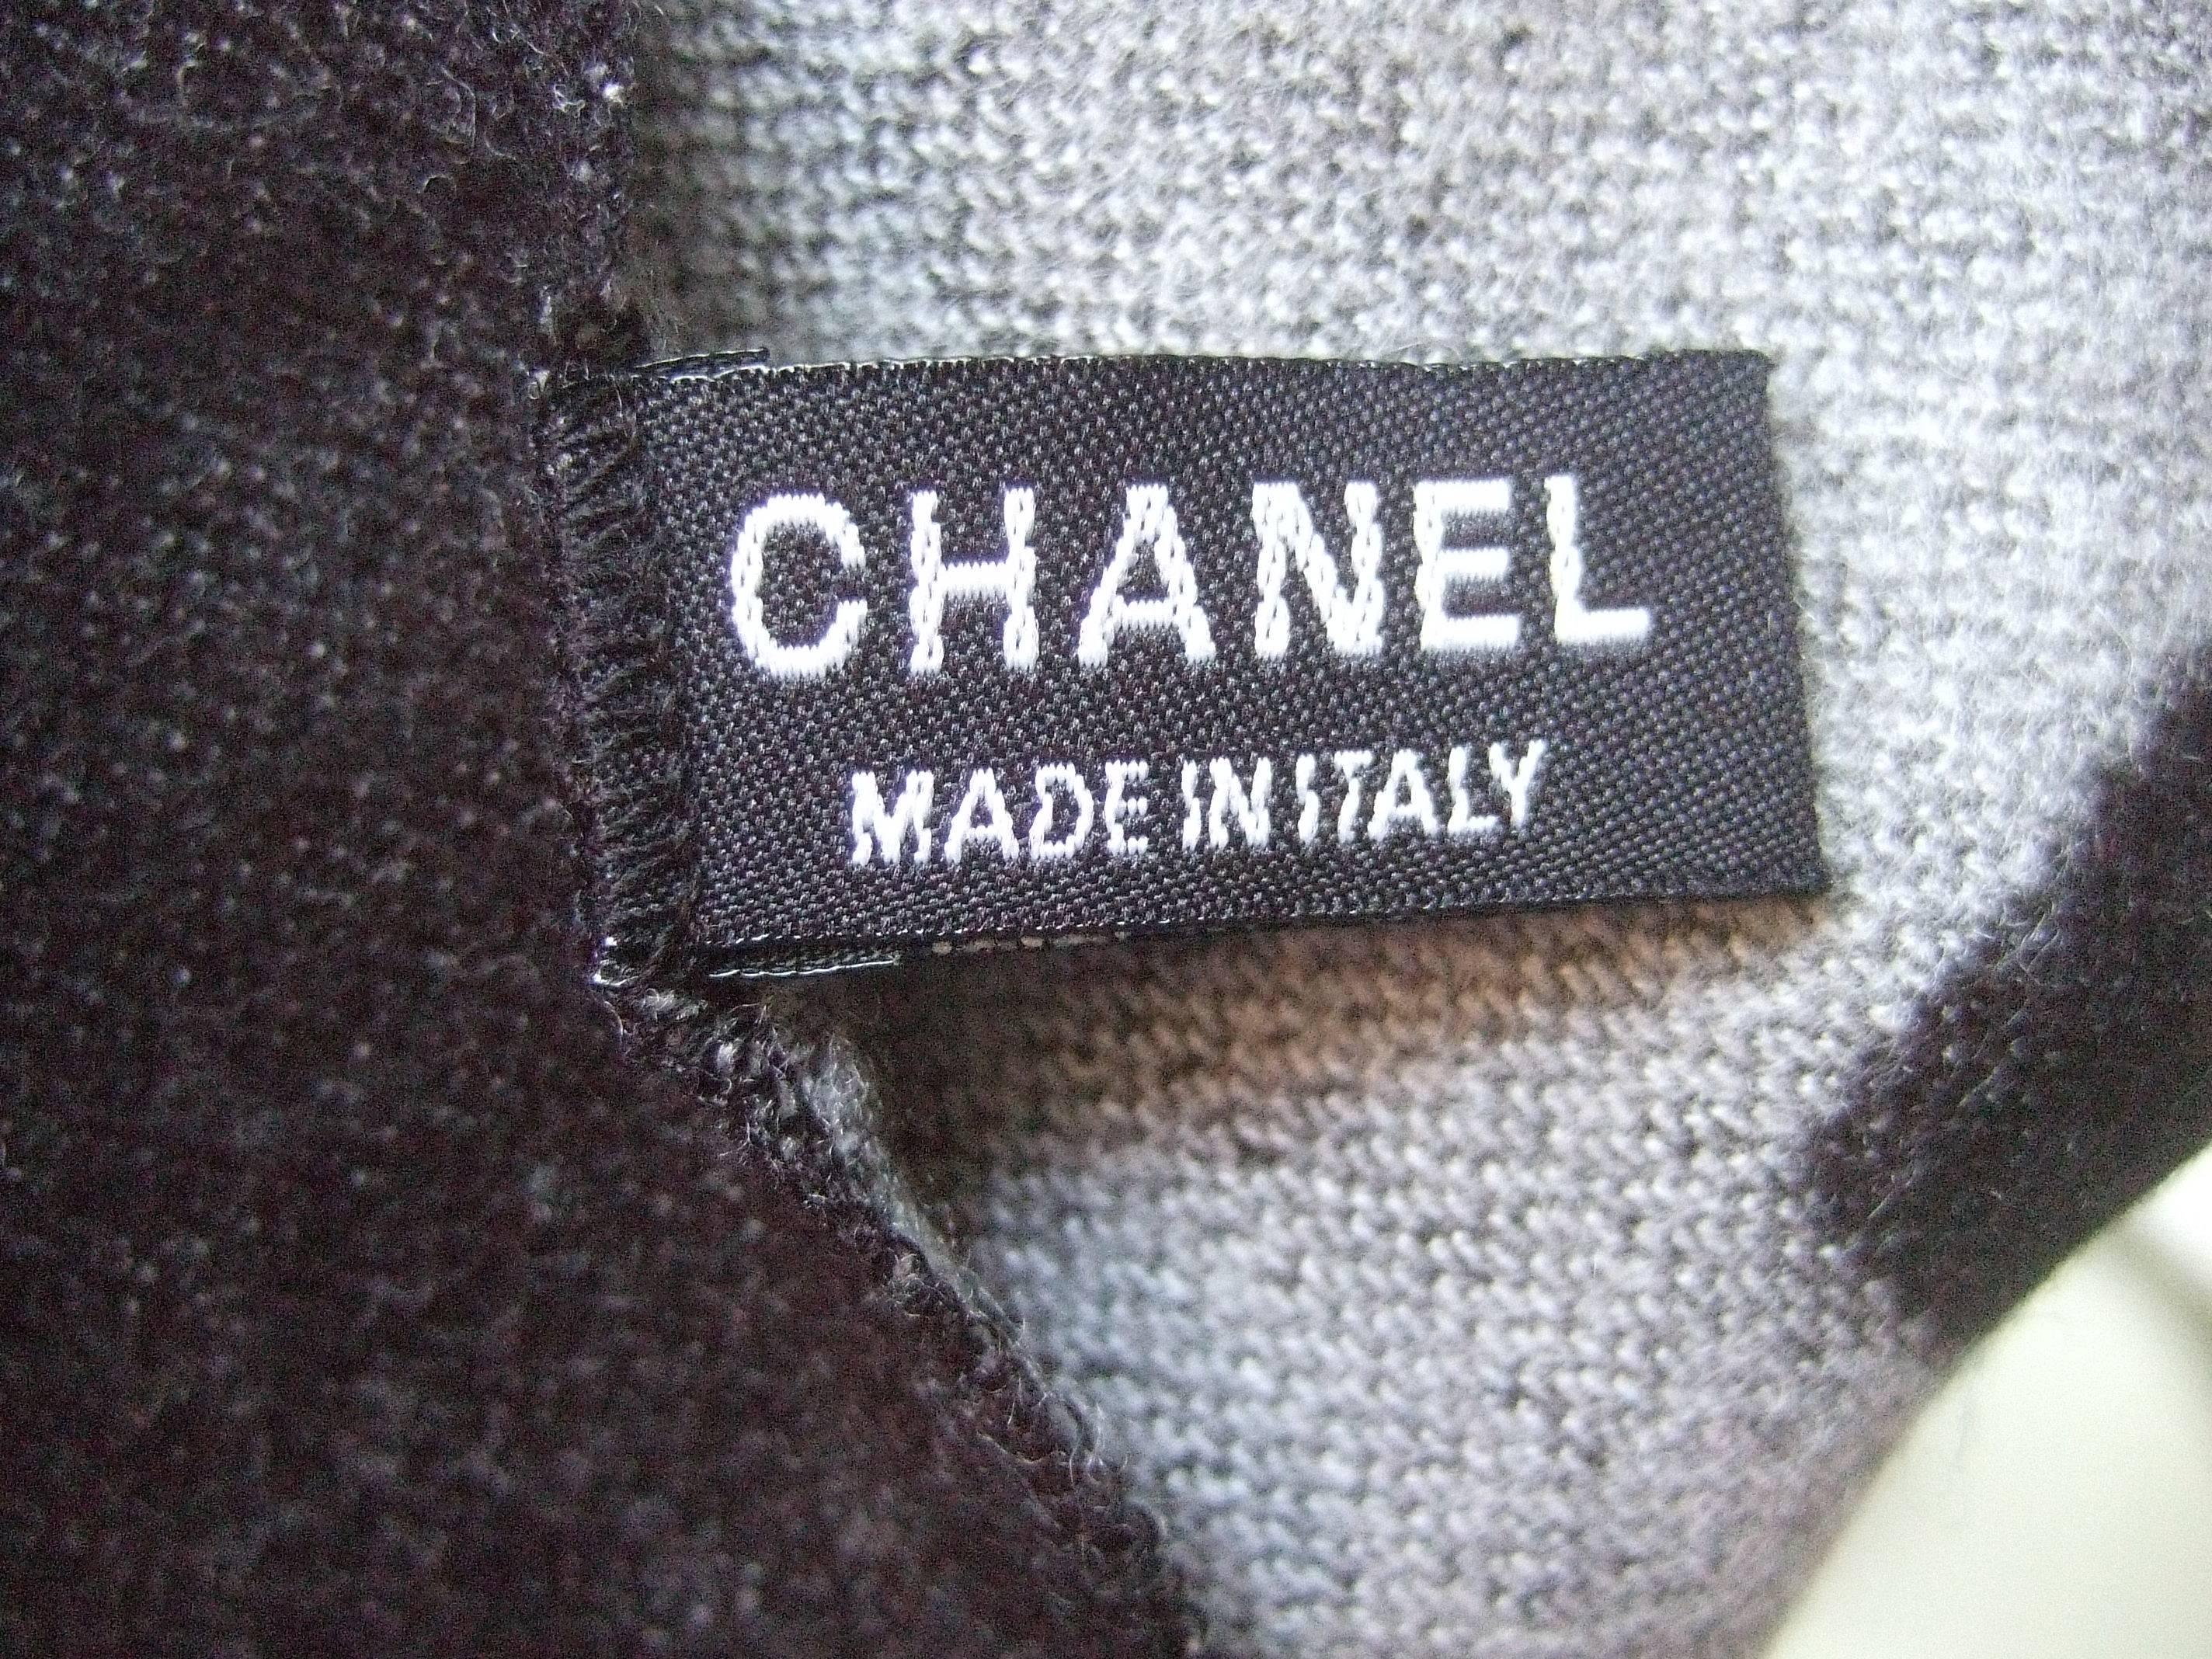 Women's Chanel Charcoal Gray Silk Wool Blend Shawl Made in Italy 